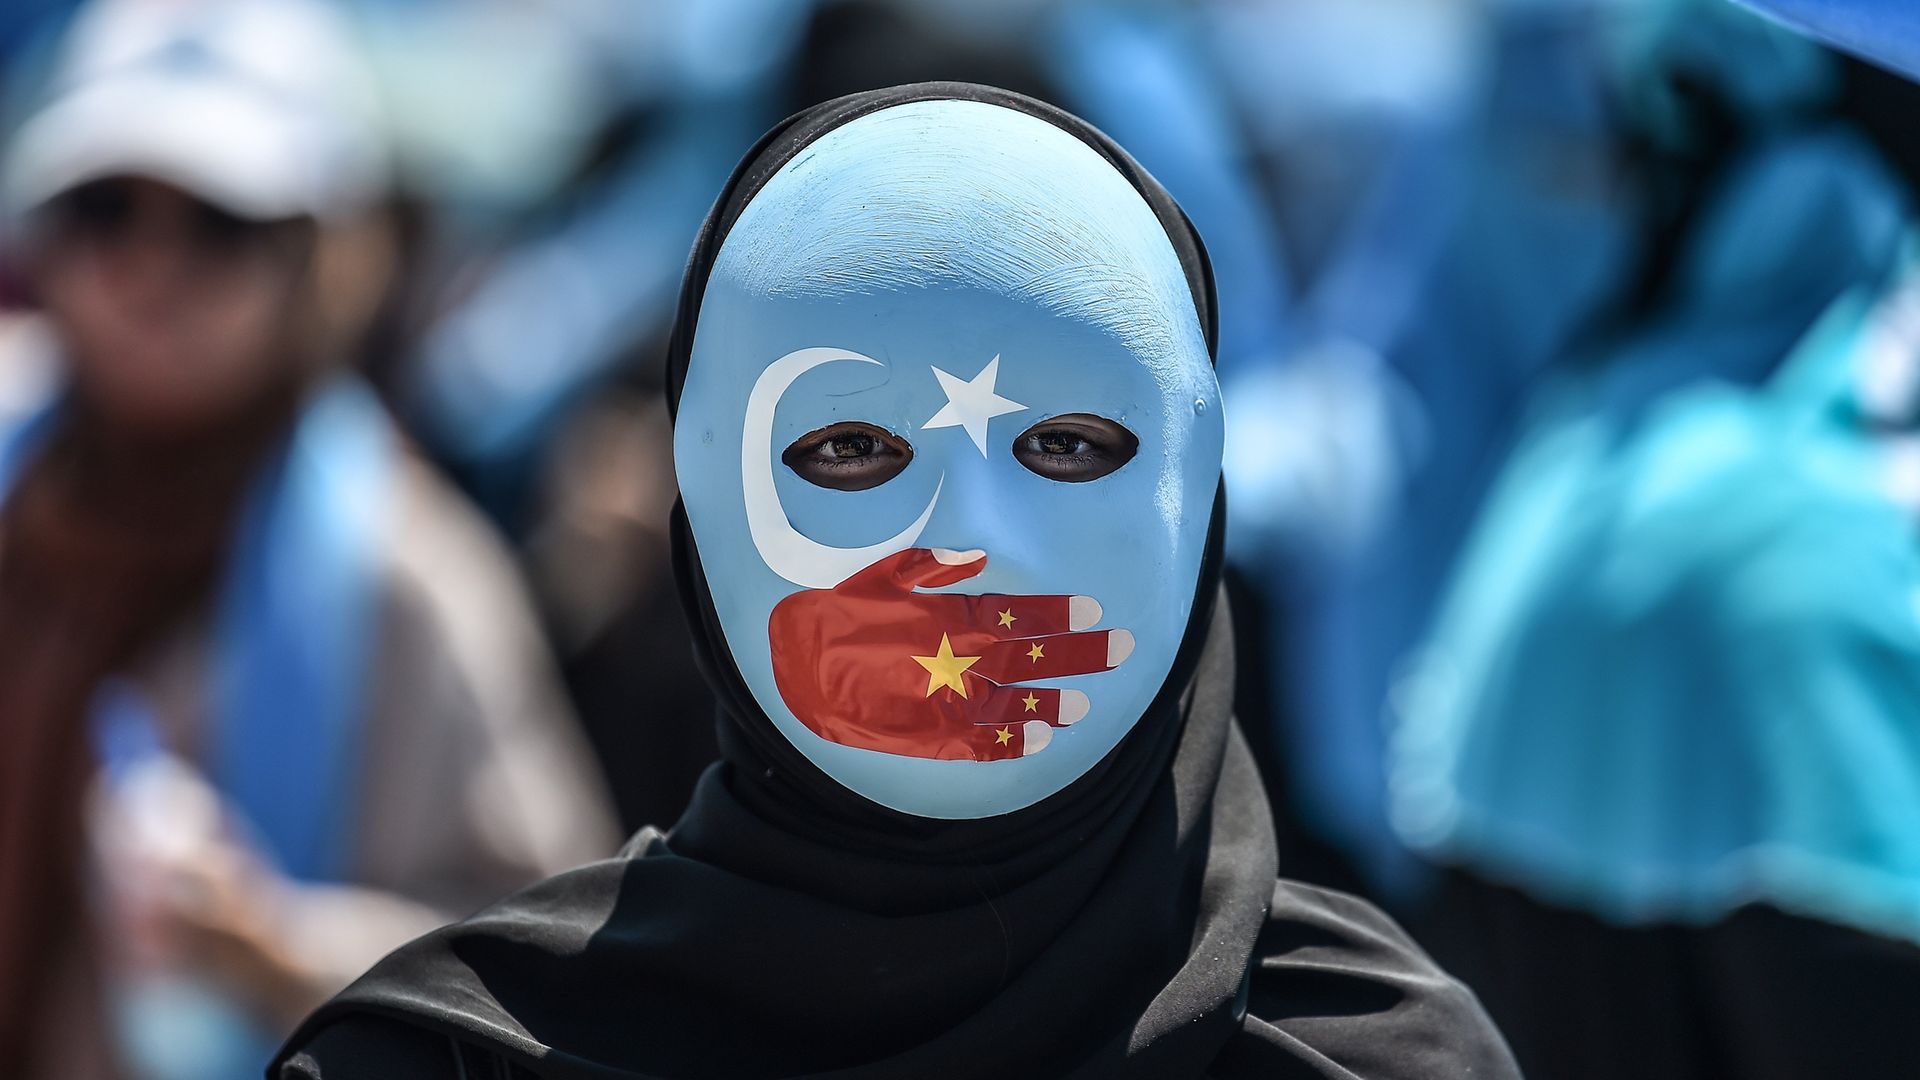 A demonstrator wearing a mask painted with the colours of the flag of East Turkestan and a hand bearing the colours of the Chinese flag attends a protest to denounce China's treatment of ethnic Uighur Muslims. - Credit: AFP via Getty Images